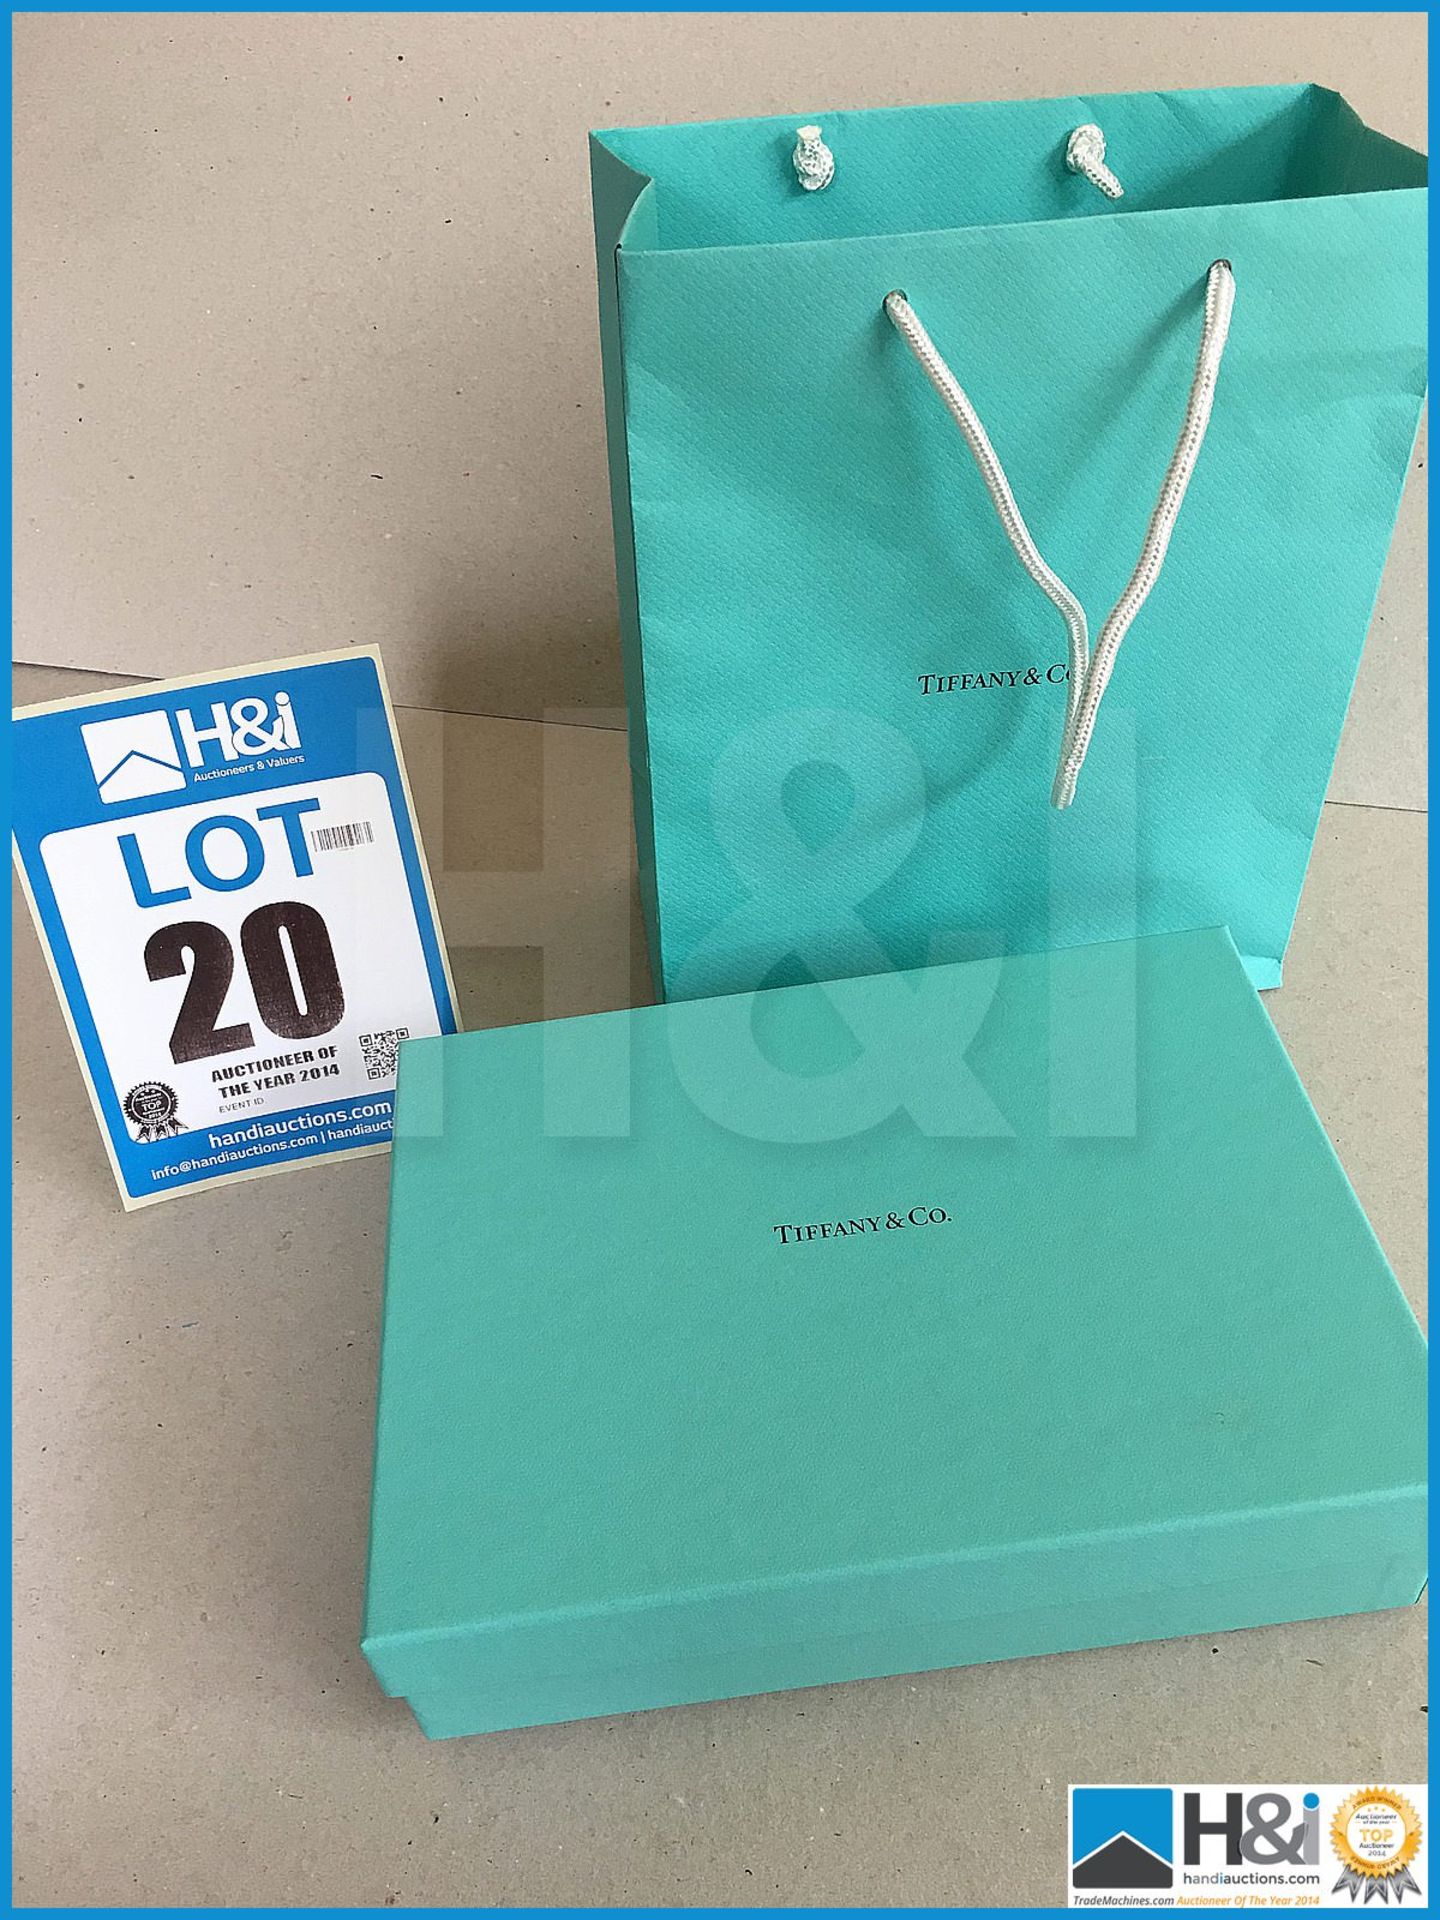 Genuine Tiffany & Co Purse / Wallet in Robins Egg Blue completely unused still with card protectors - Image 10 of 11